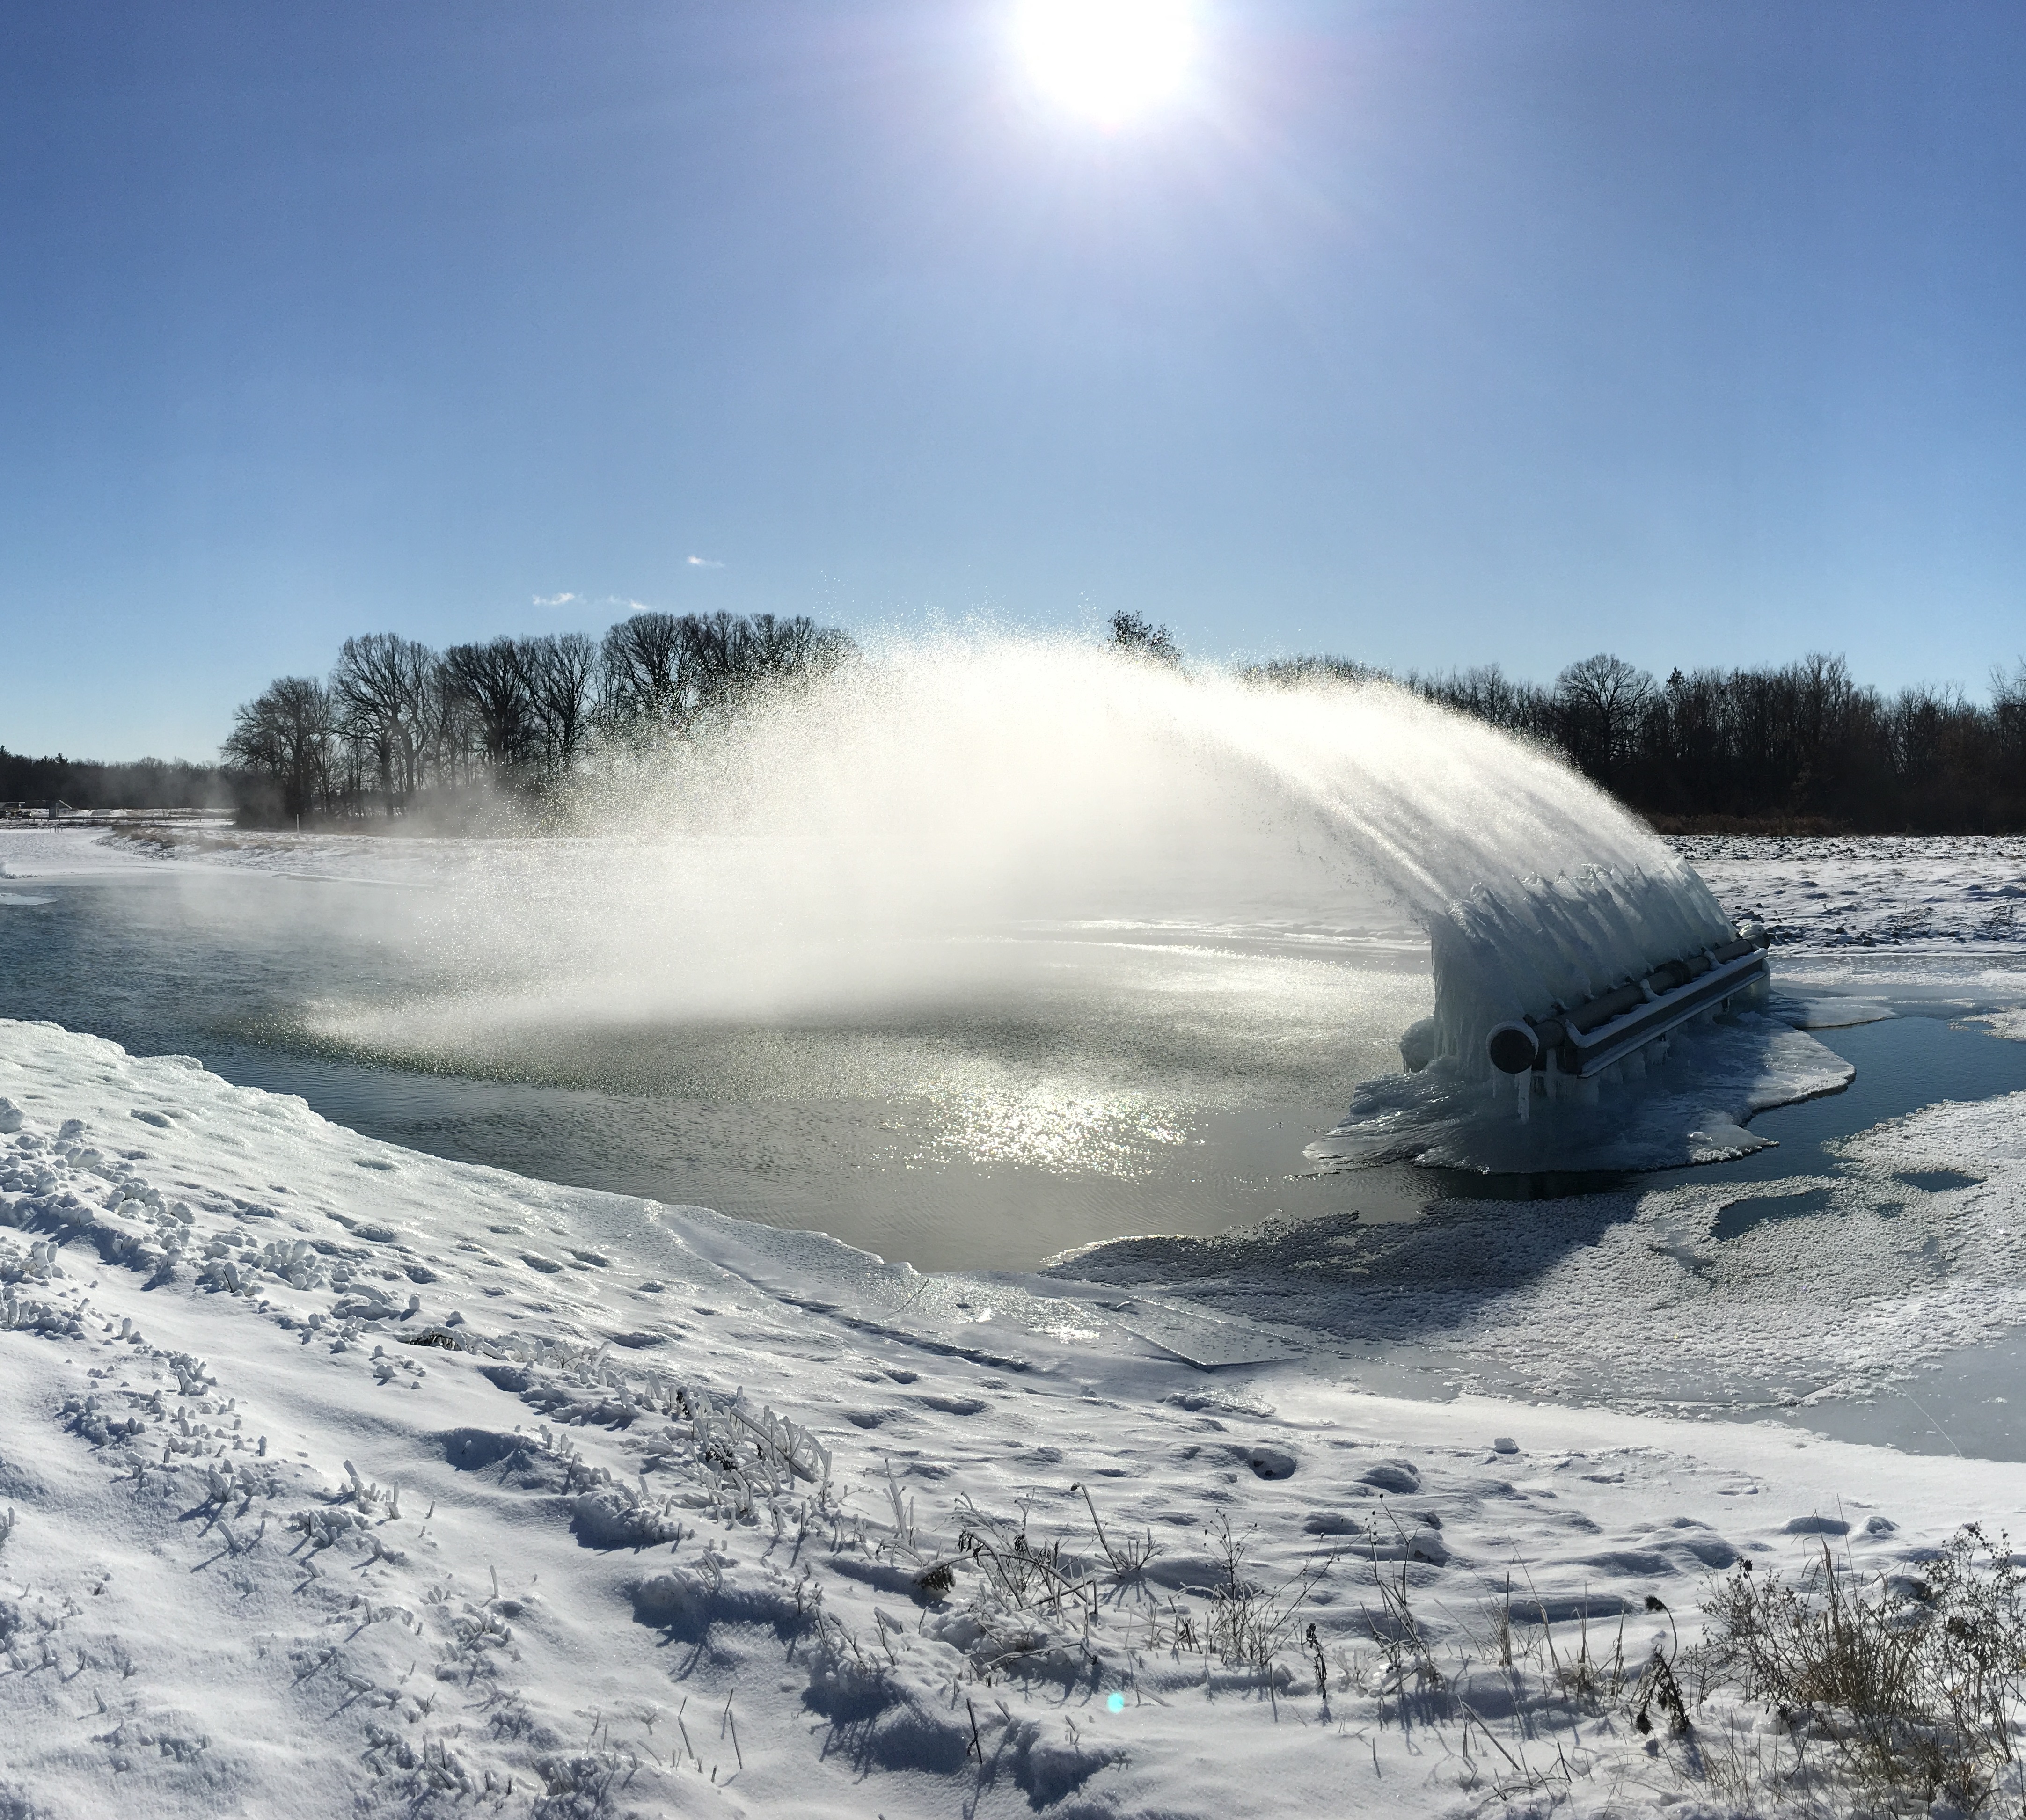 This was captured at the Main Injector pond spray header on a cold January afternoon. Photo: Arvydas Vasonis, landscape, nature, winter, snow, ice, sky, sun